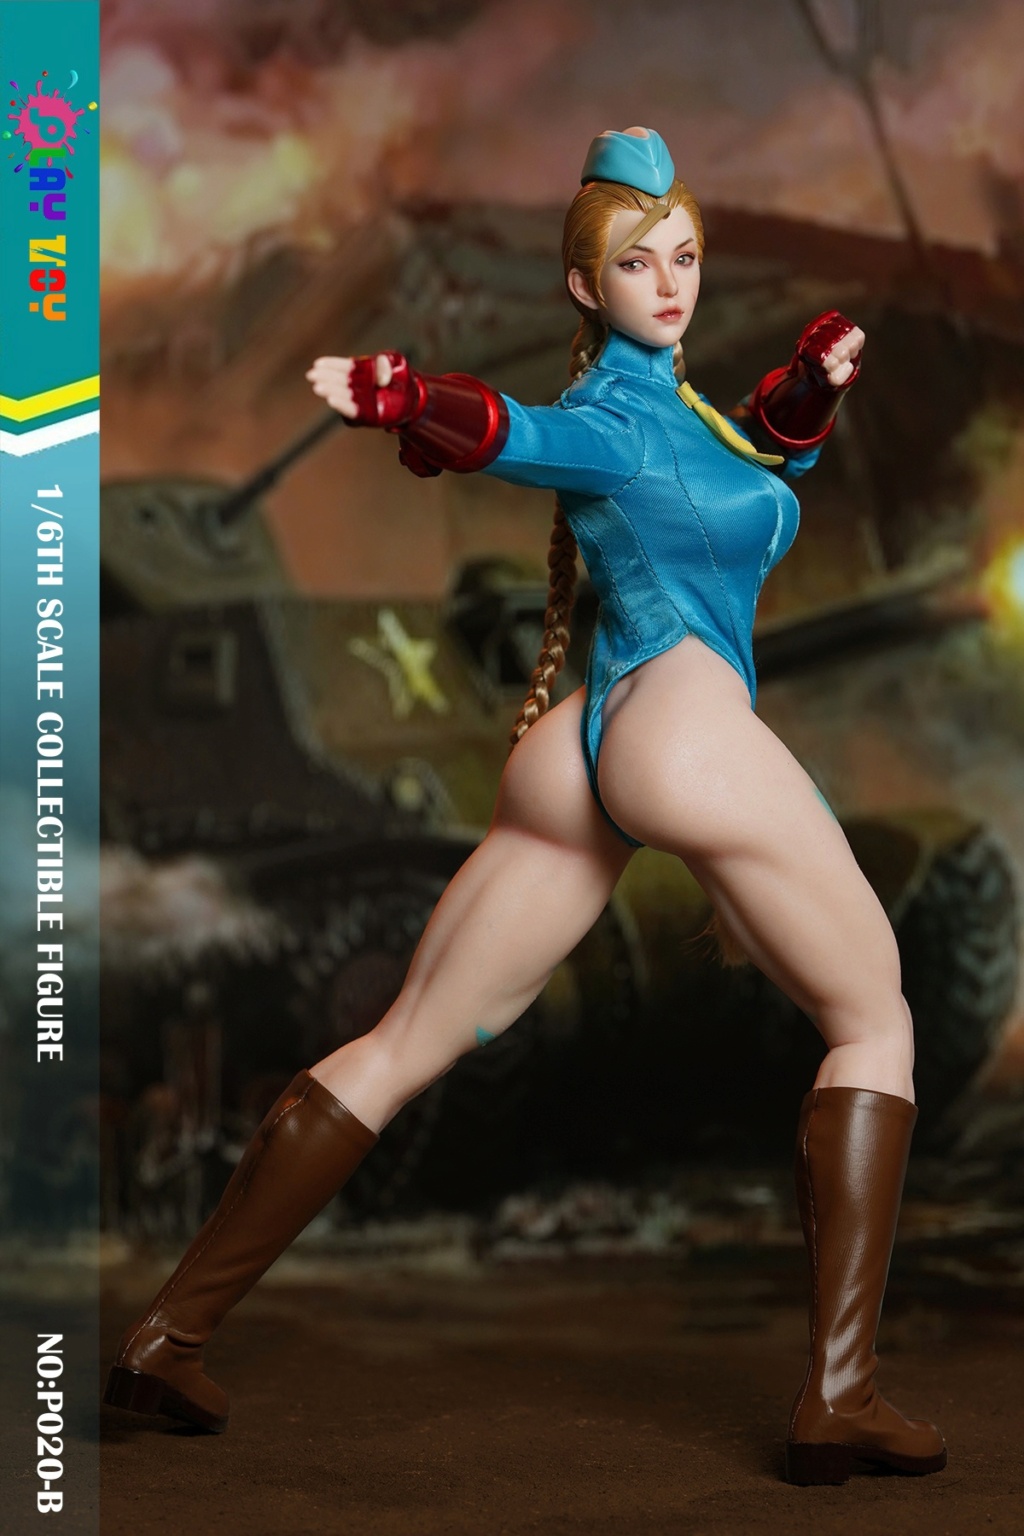 NEW PRODUCT: Play Toy: P020 1/6 Scale Female Fighter in 2 styles 11442511